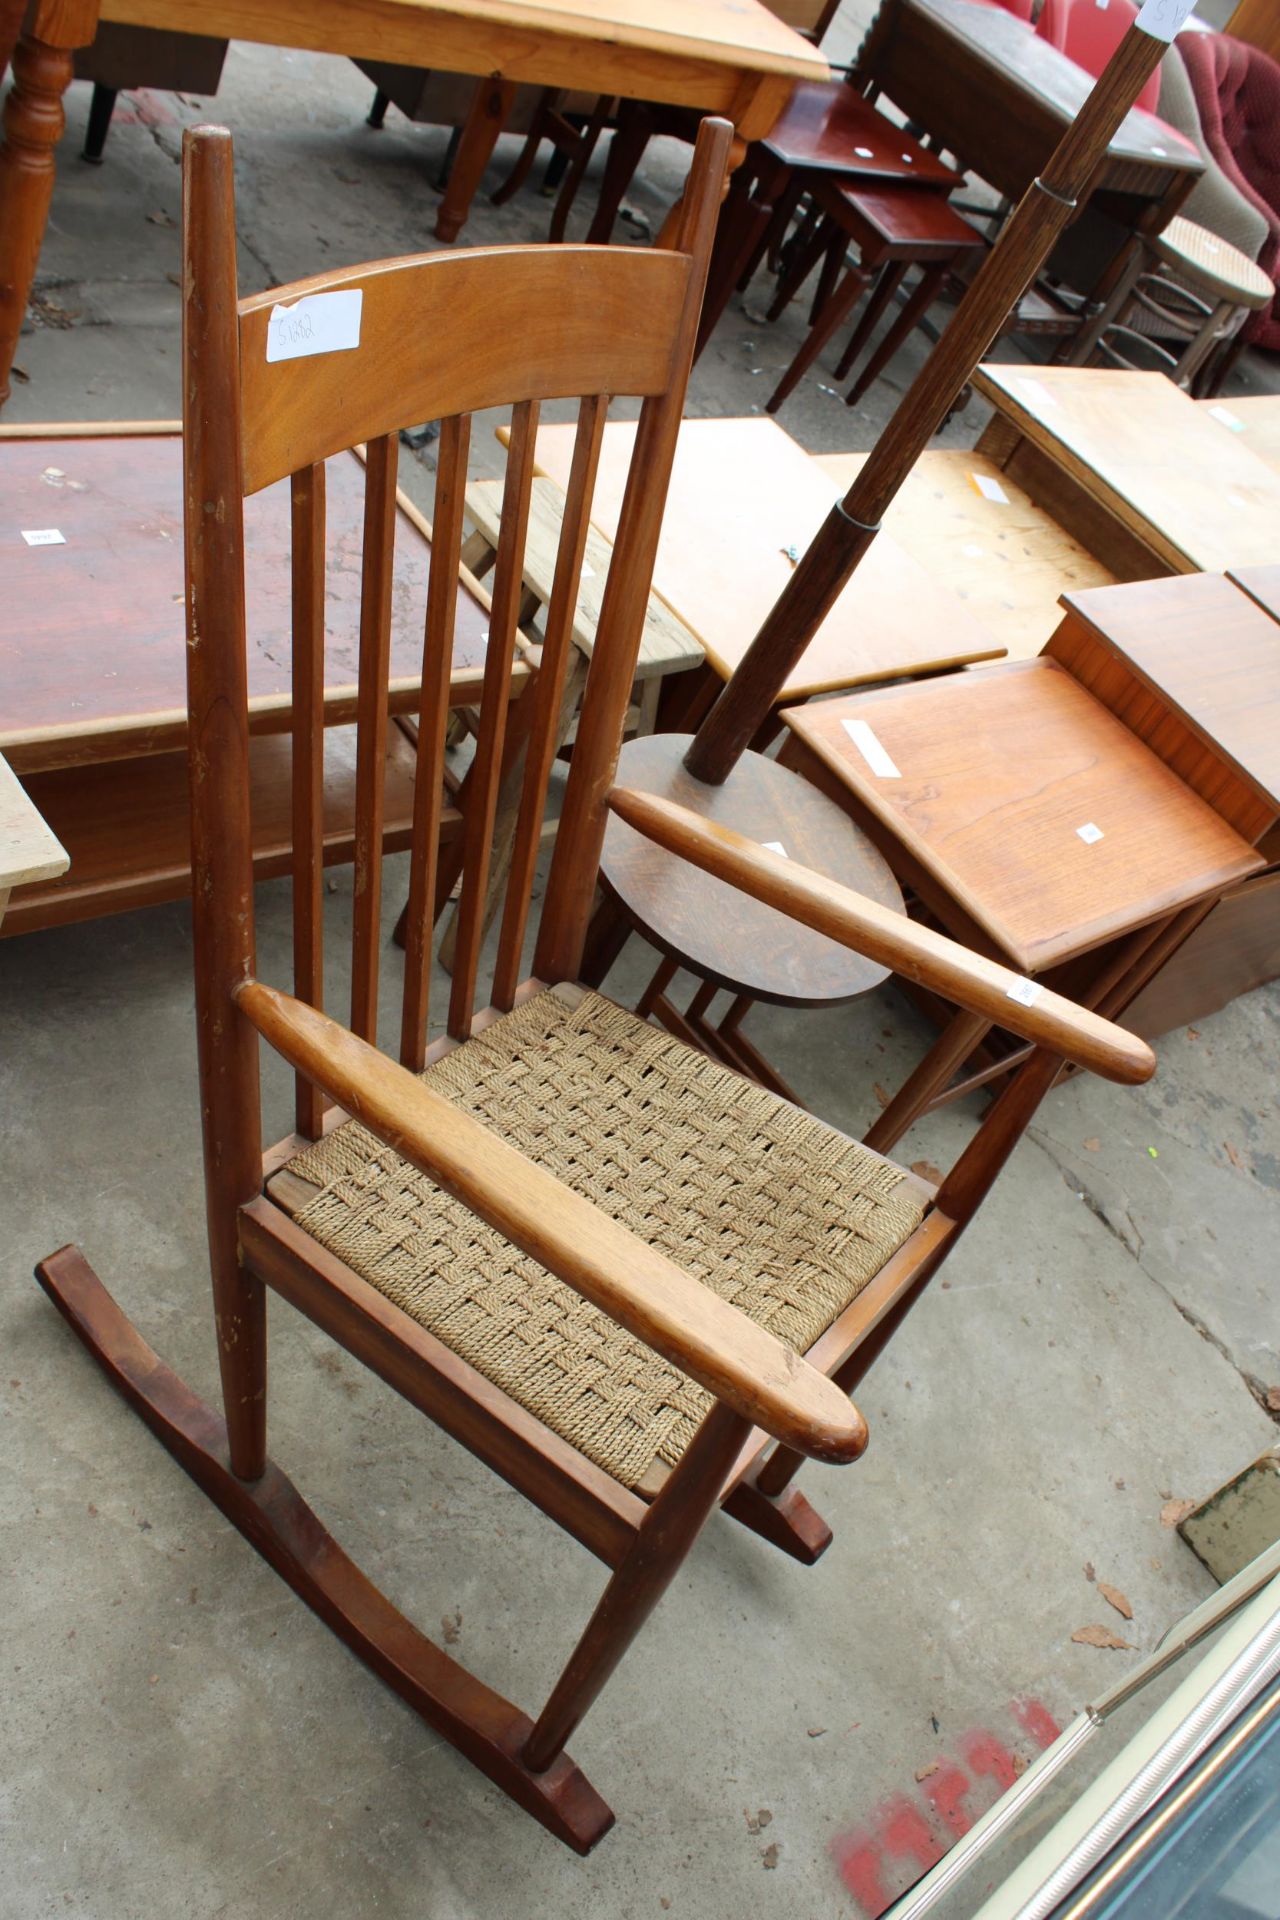 A MID 20TH CENTURY HARDWOOD ROCKING CHAIR WITH DROP-IN WOVEN SEAT